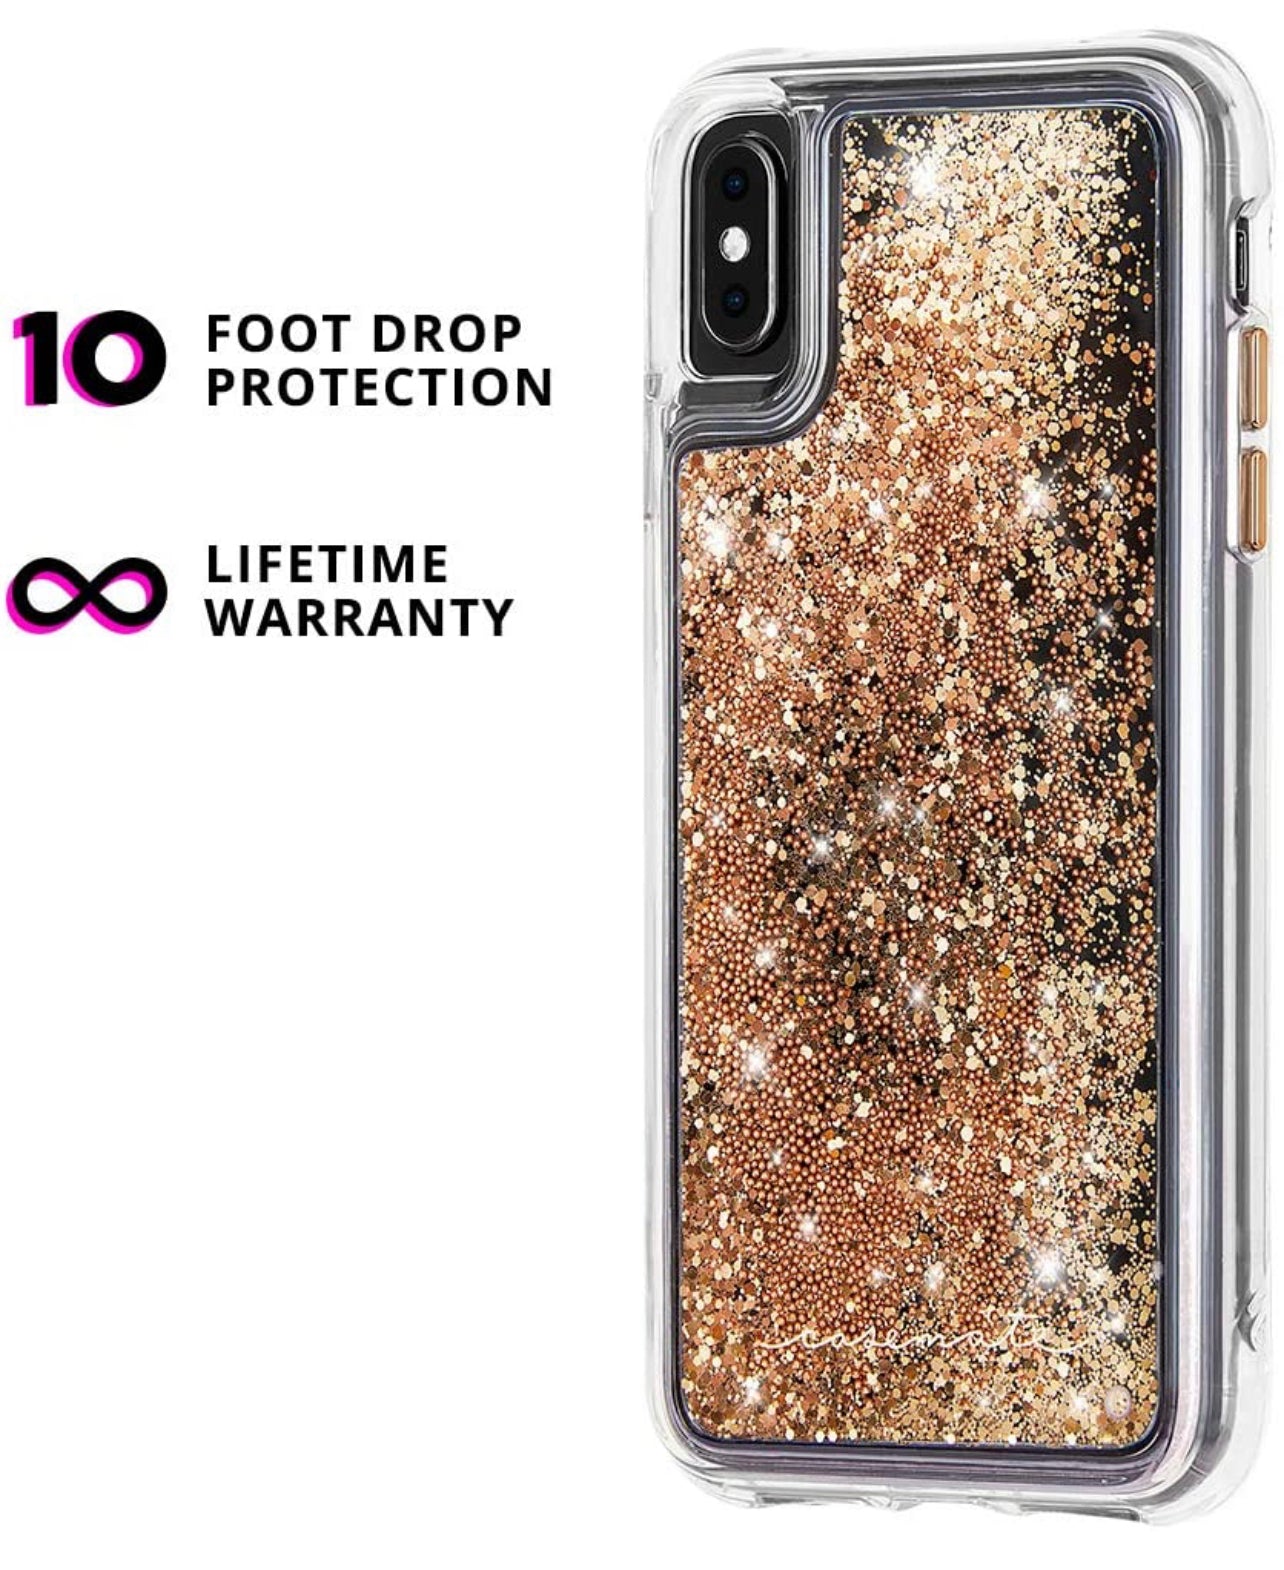 Case-Mate - iPhone XS Max Case - WATERFALL - iPhone 6.5 - Gold